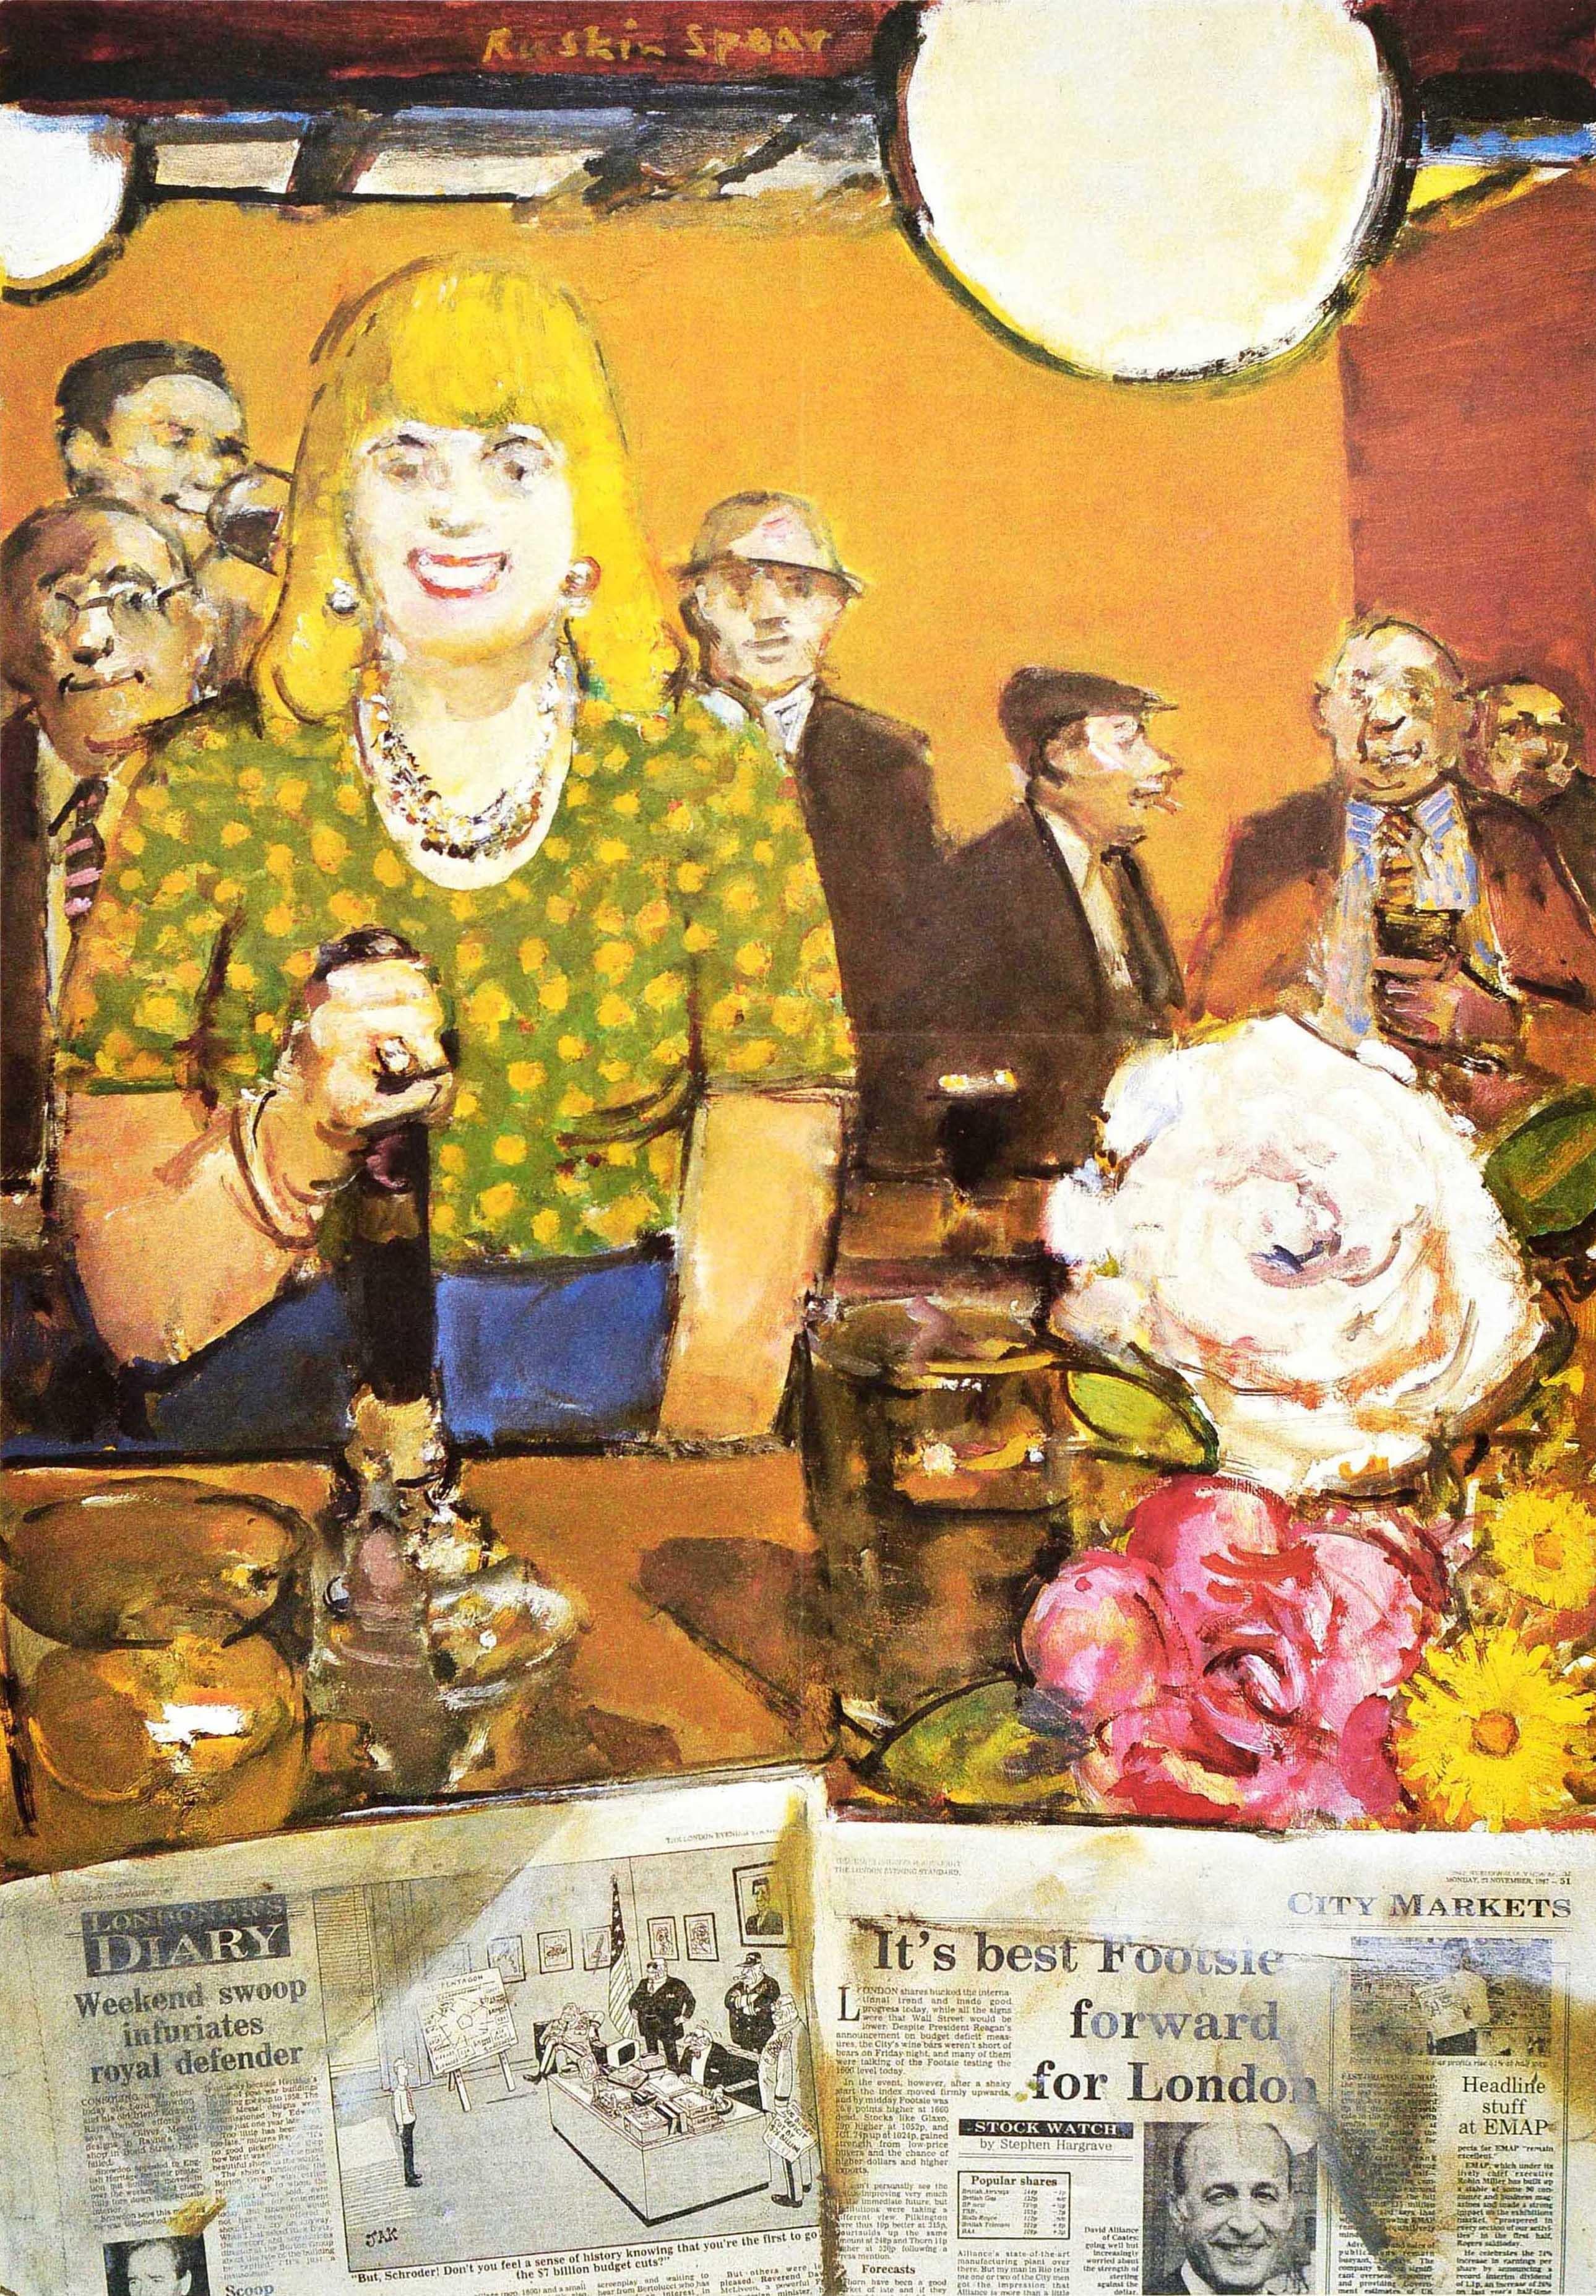 Original vintage London Underground poster for the Art on the Underground series - Art At The Royal Academy nearest stations Green Park, Piccadilly Circus - featuring a pub landlady pulling a pint of beer with customers in the background and flowers